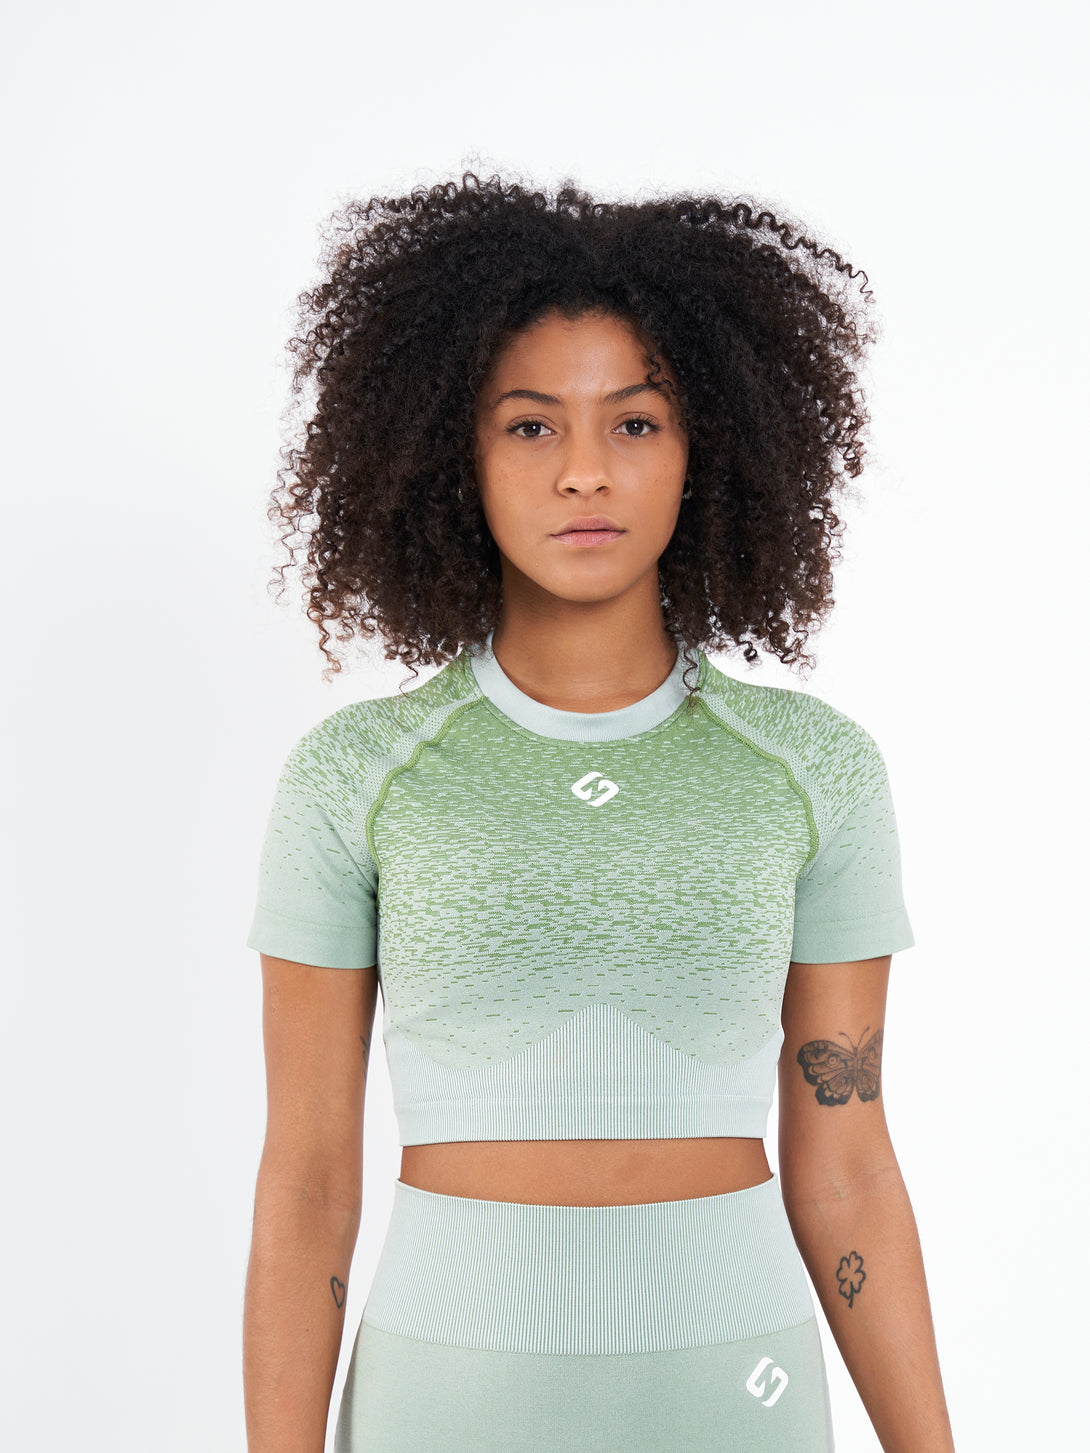 A Woman Wearing Mist Green Color Seamless Crop Top with Ombre Effect. Chic Comfort